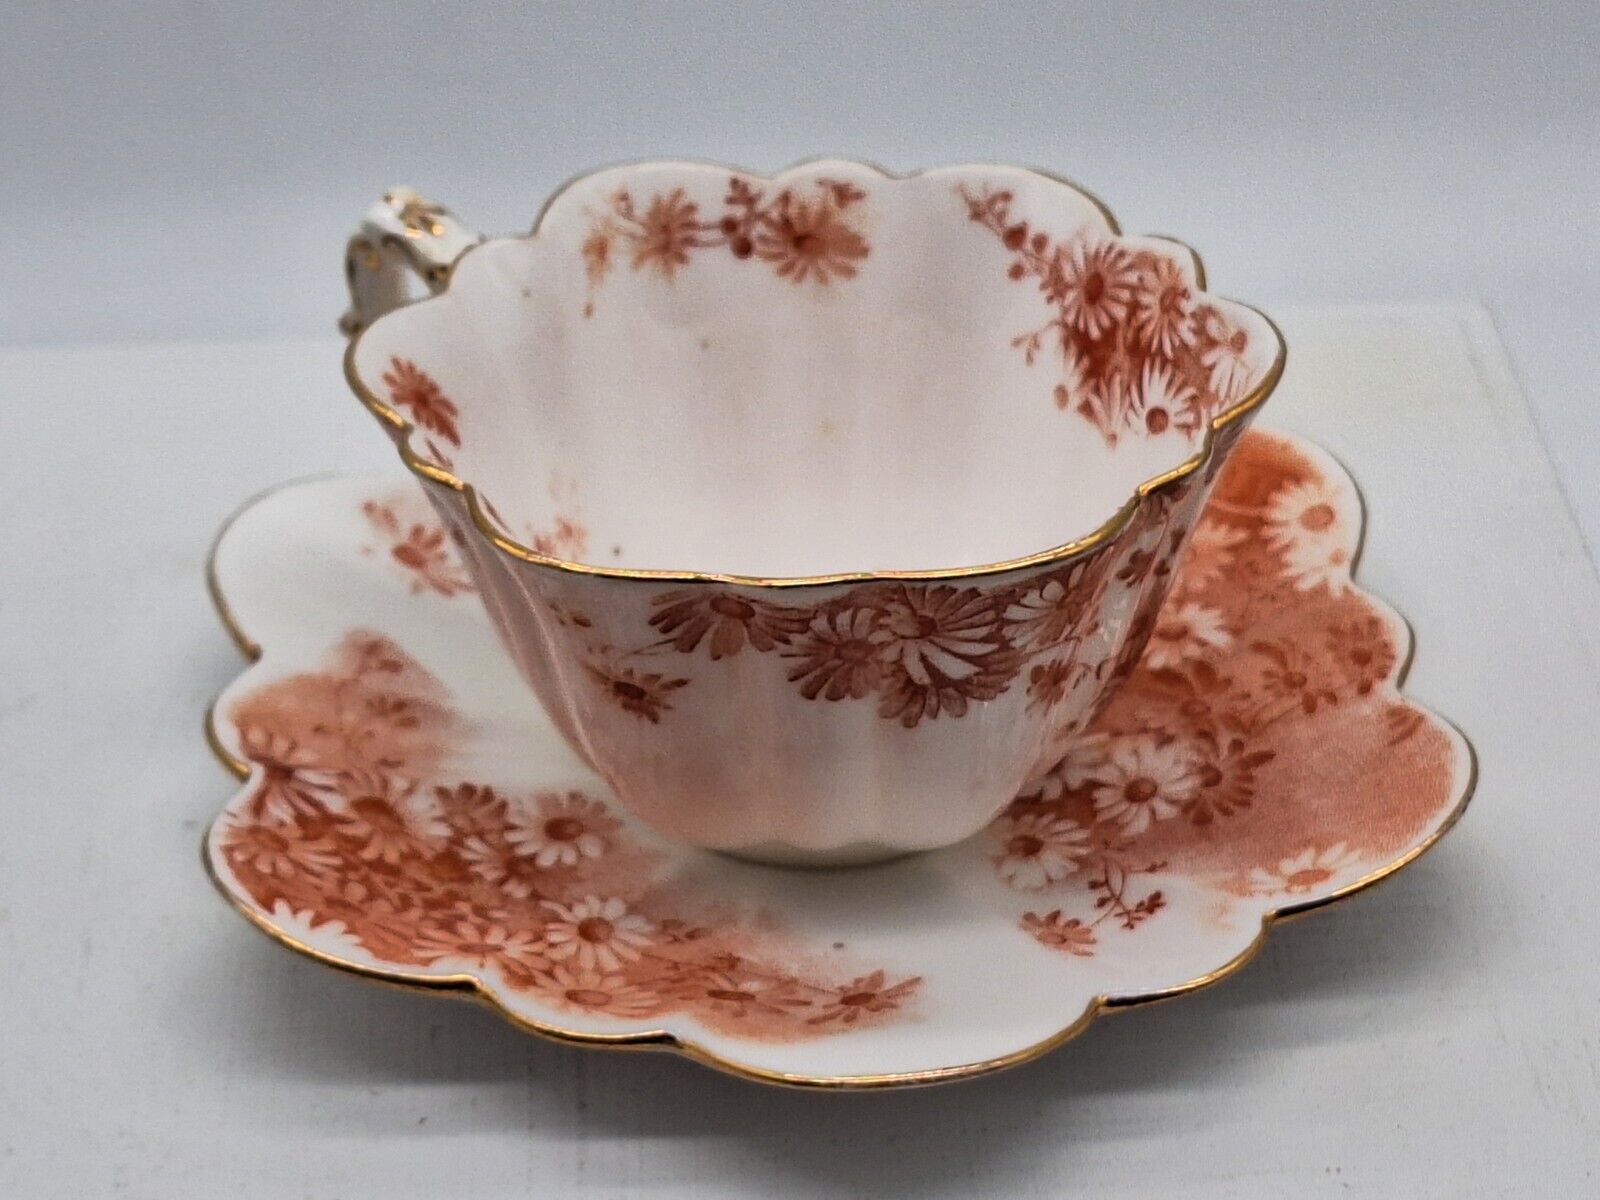 Cup and Saucer Small Wileman Foley Bone China Daisy Shape 283632  C.1890